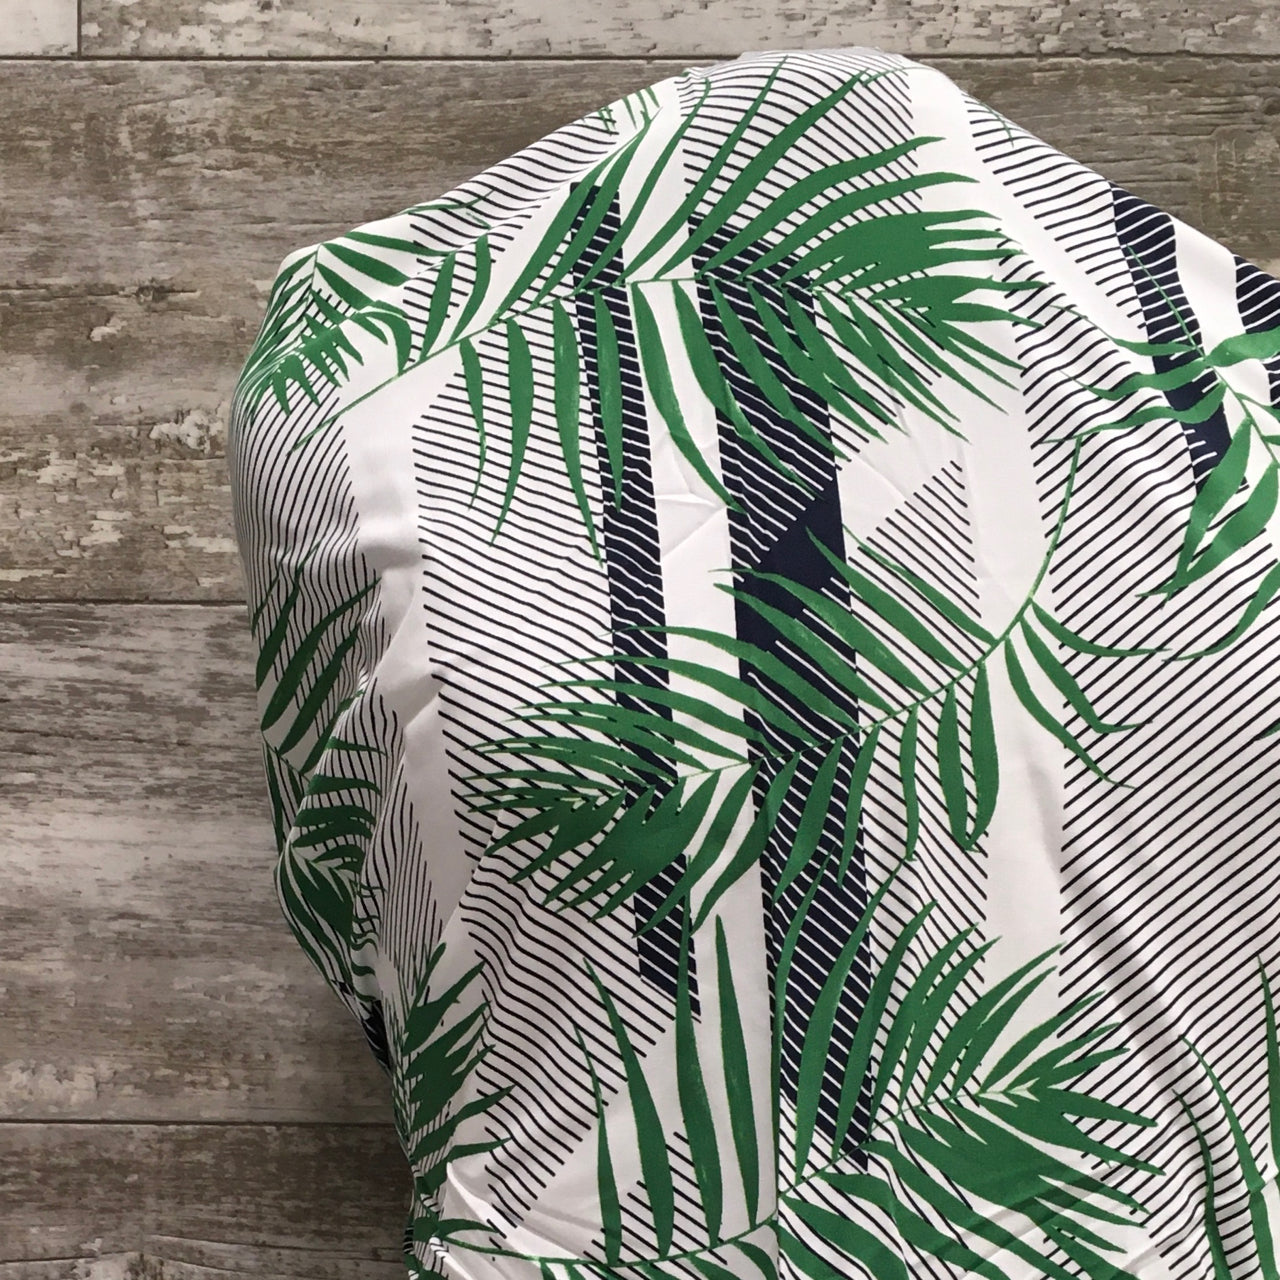 Viscose / Woven Palm Sunday Green - Sold by the half yard